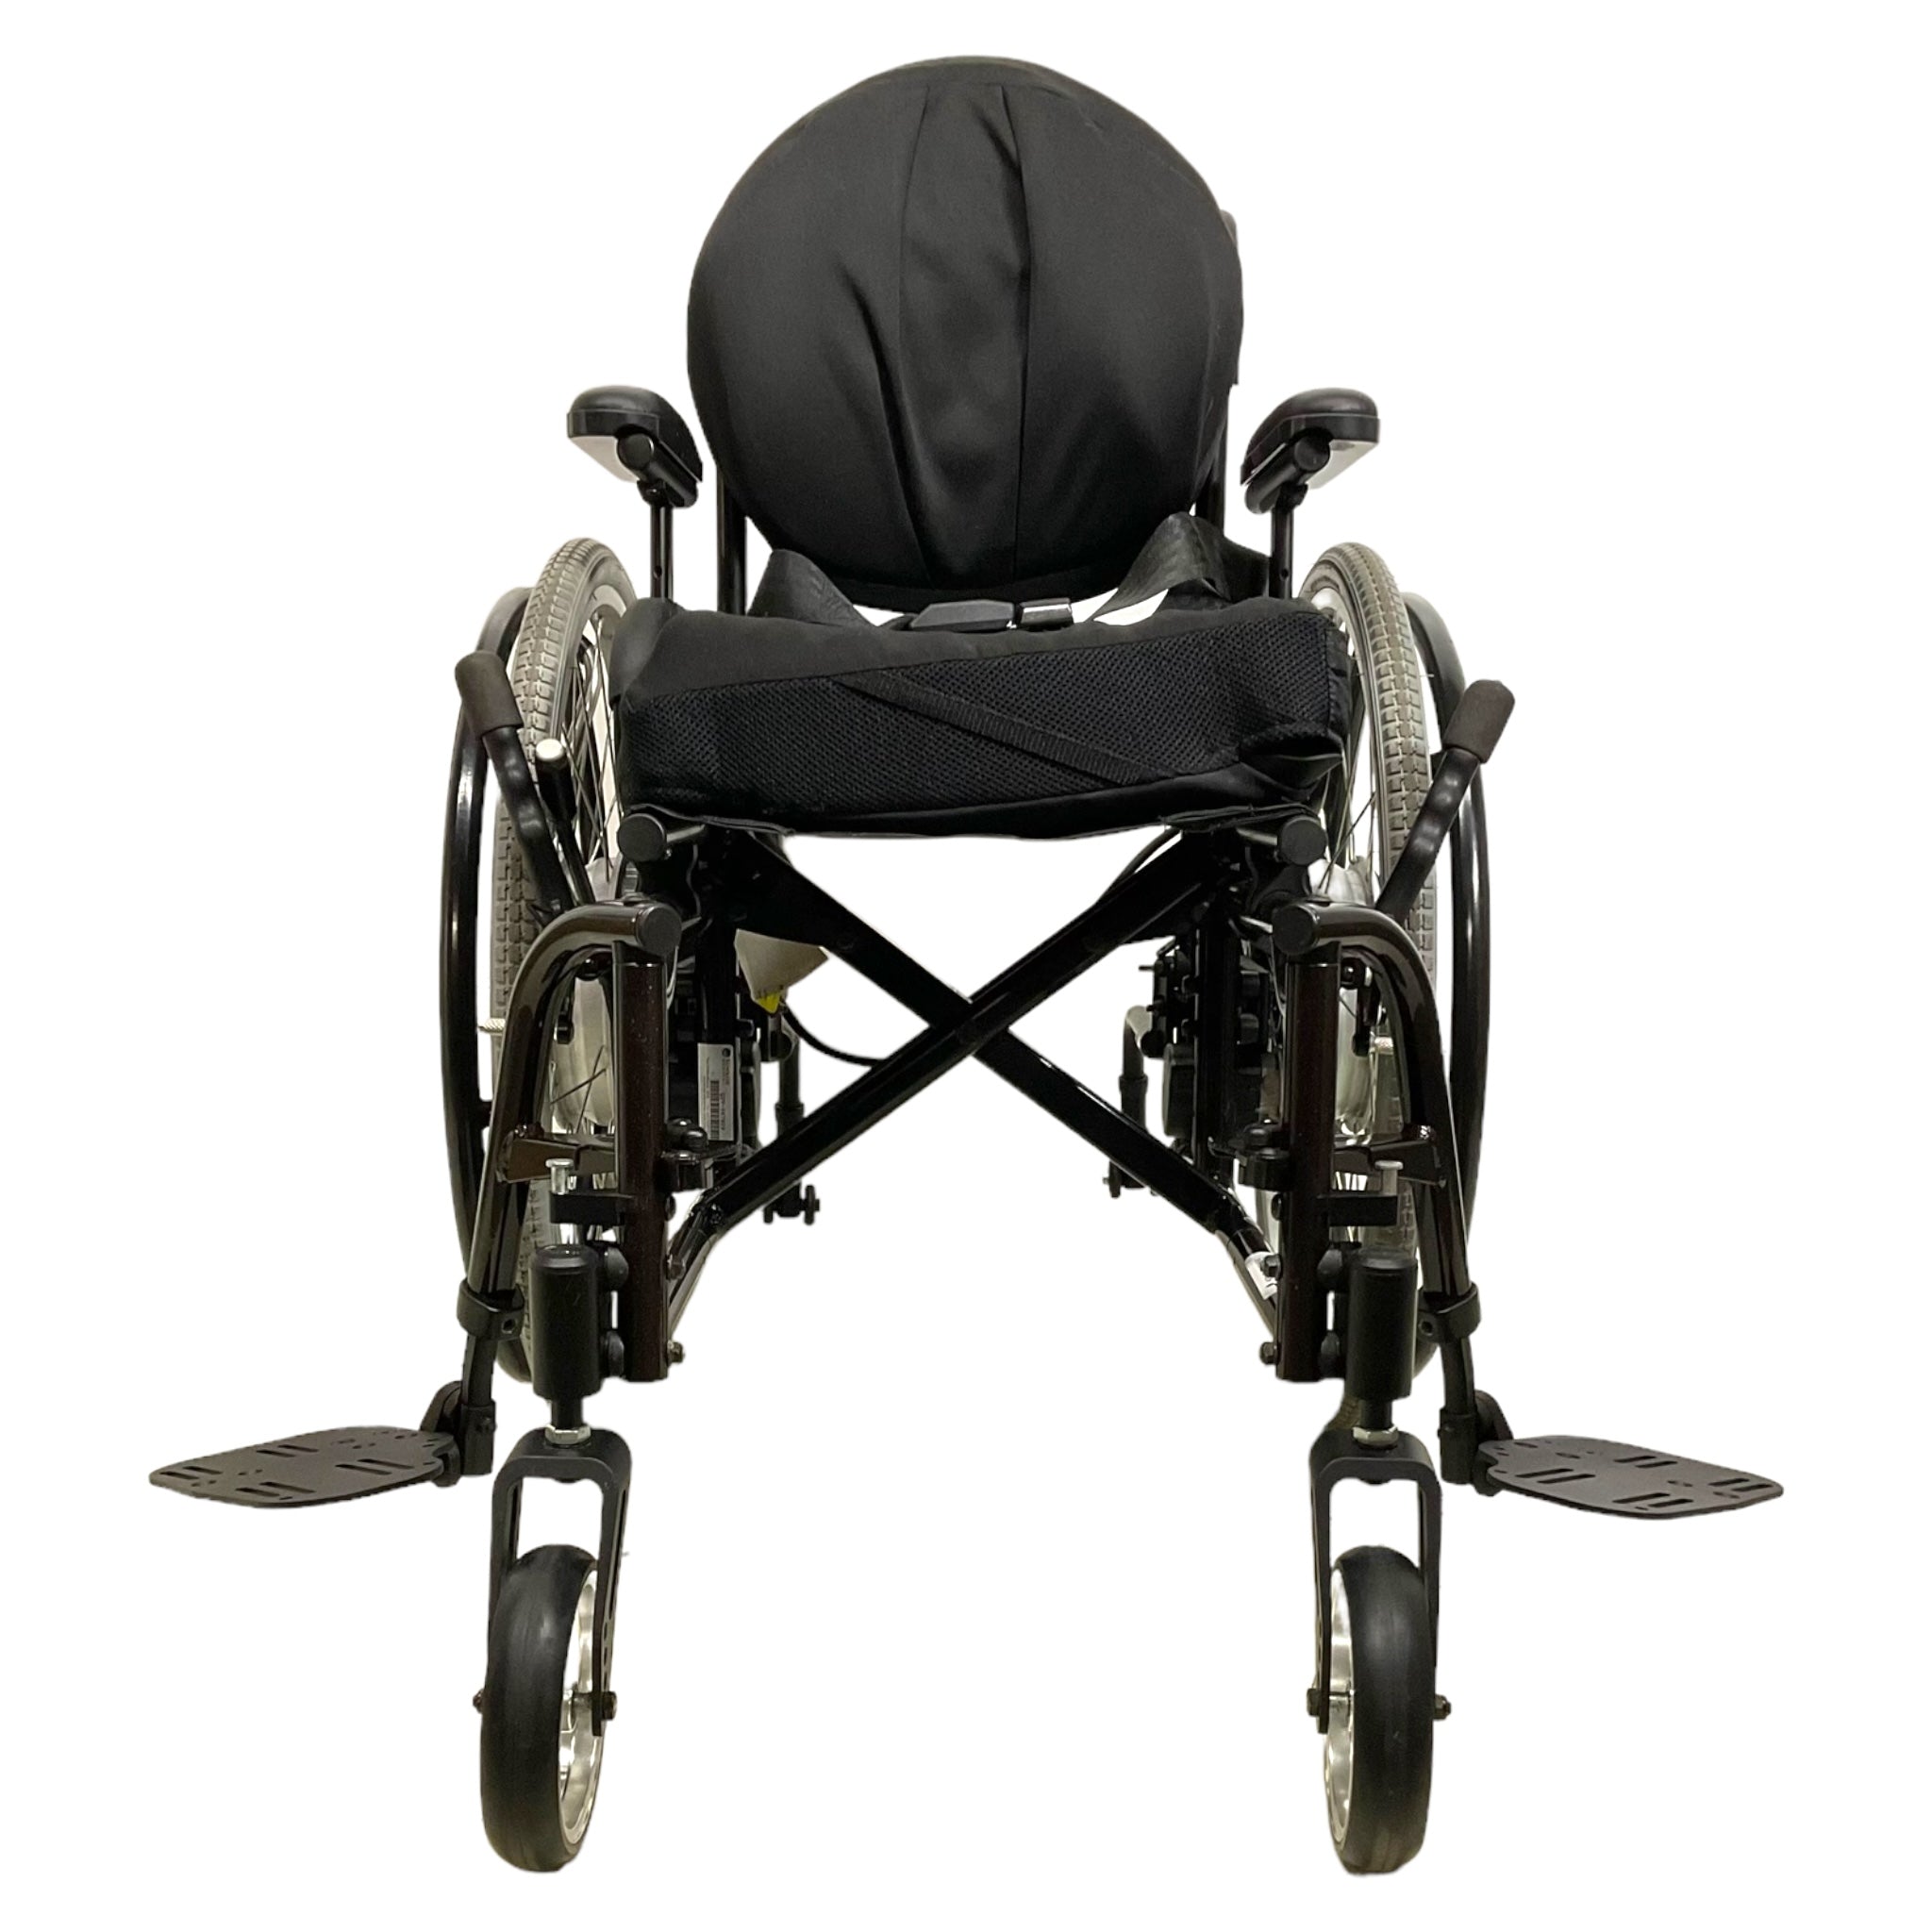 Sunrise Medical Quickie 2 Manual Wheelchair with Power Assist Wheels | 14 x  16 inch Seat | Swing-Away Leg Rests